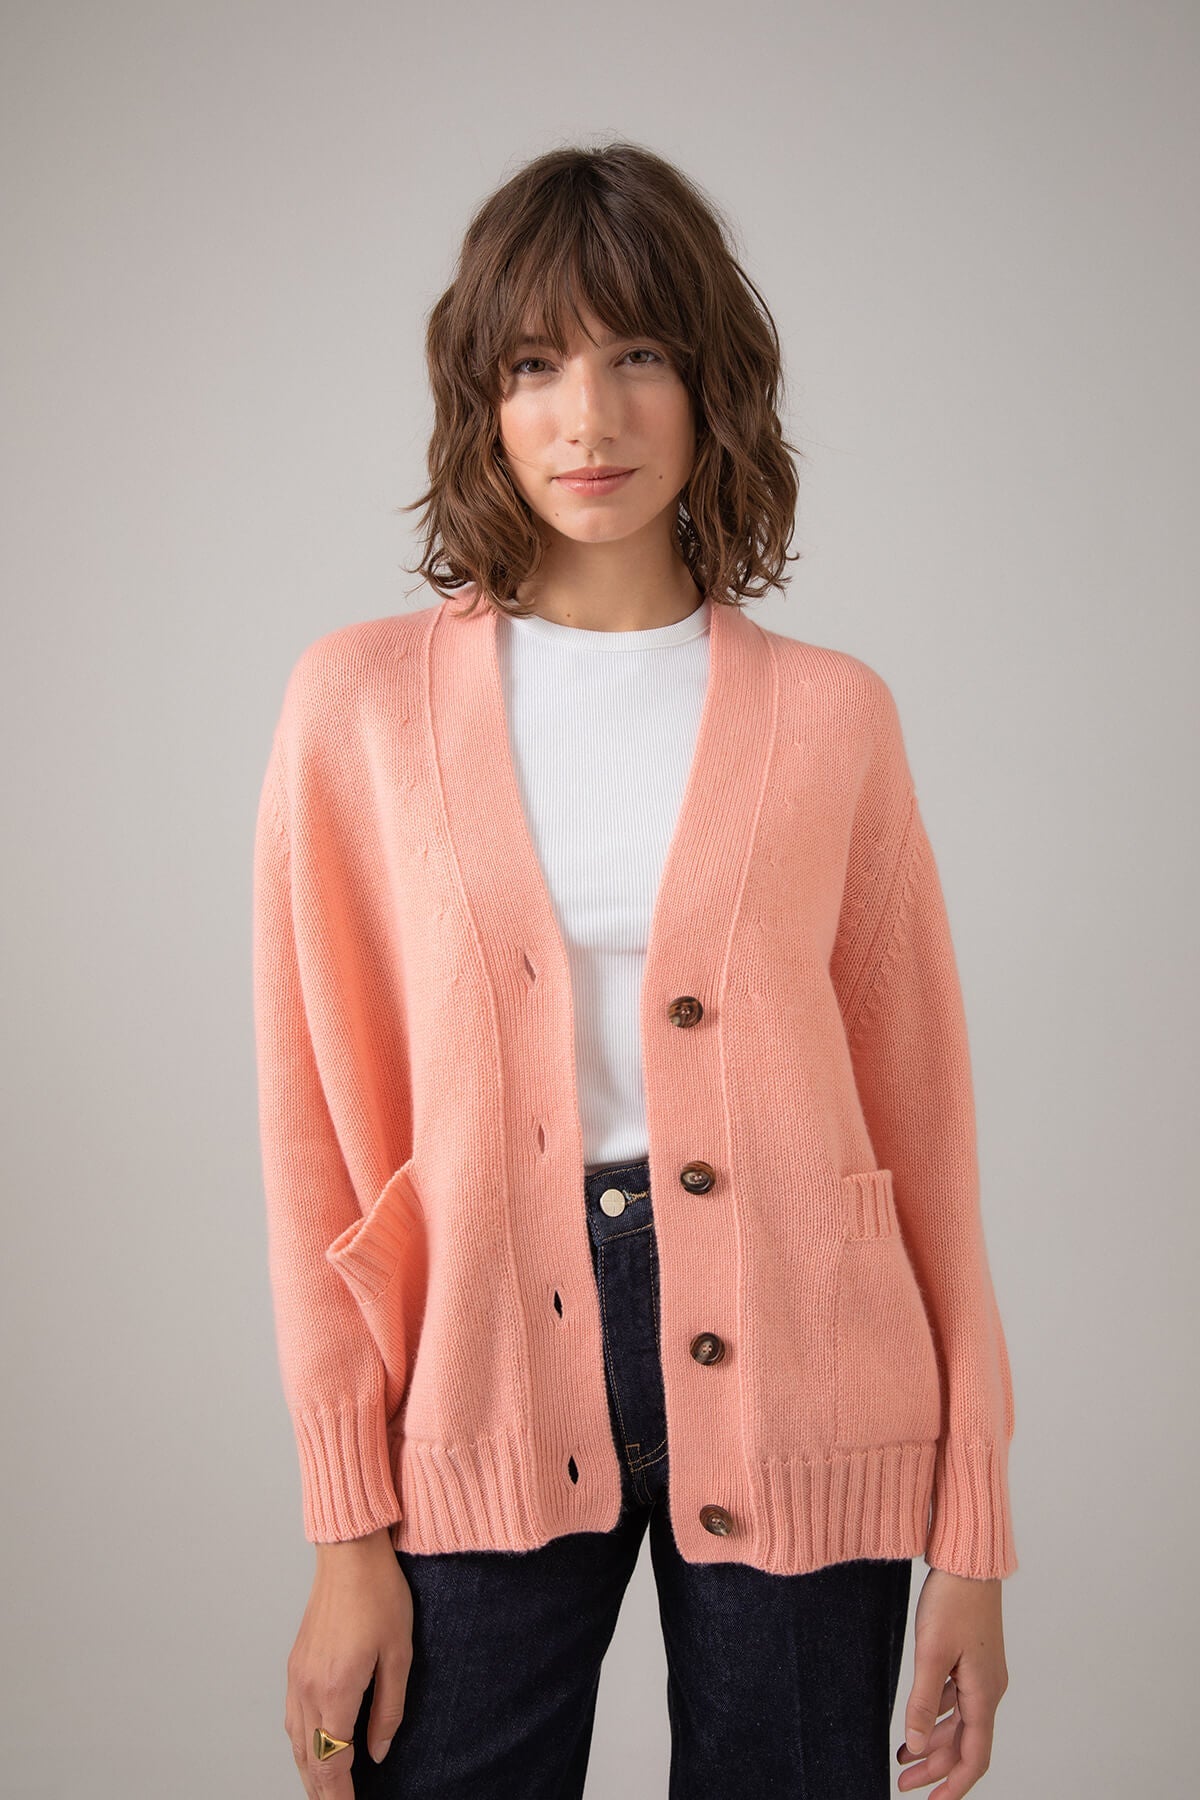 Johnstons of Elgin Women's Relaxed Fit Cashmere Cardigan in Sea Pink worn with a White T-Shirt KAC05087SE4916